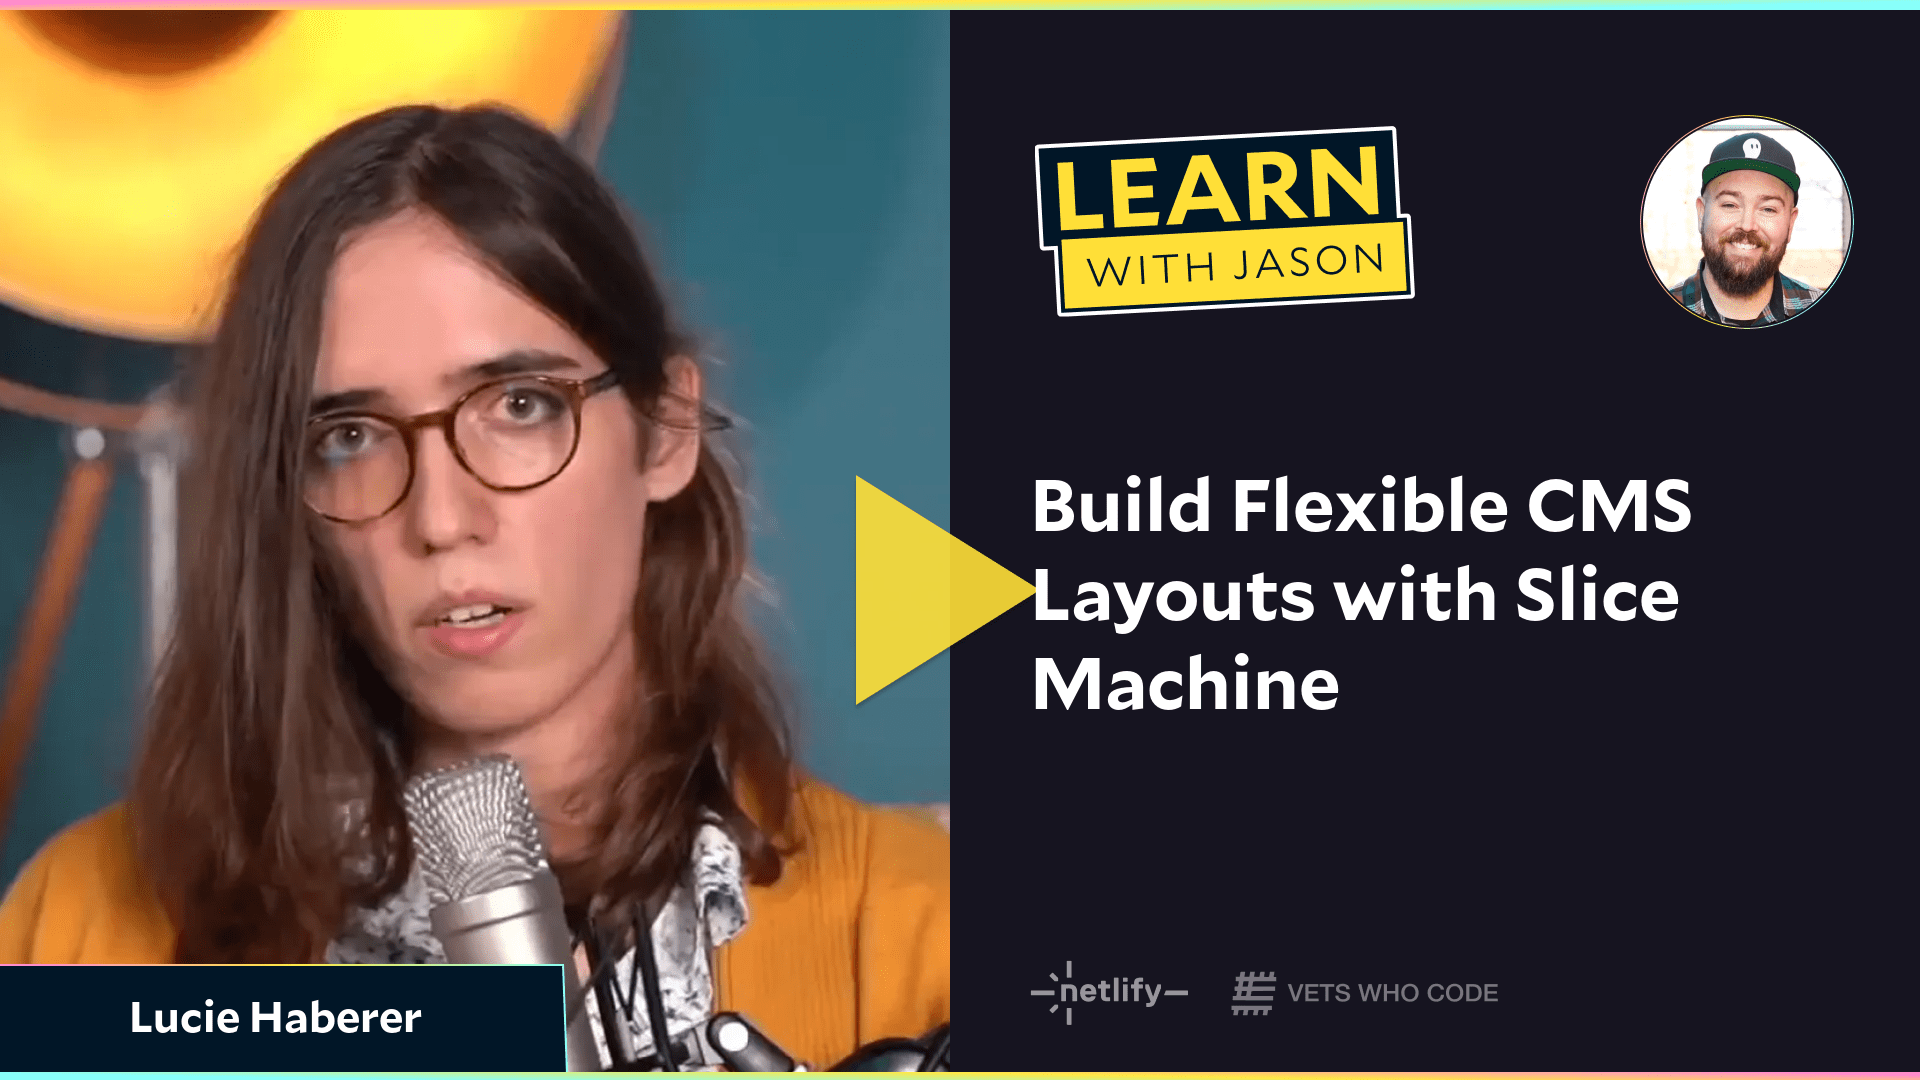 Build Flexible CMS Layouts with Slice Machine (with Lucie Haberer)